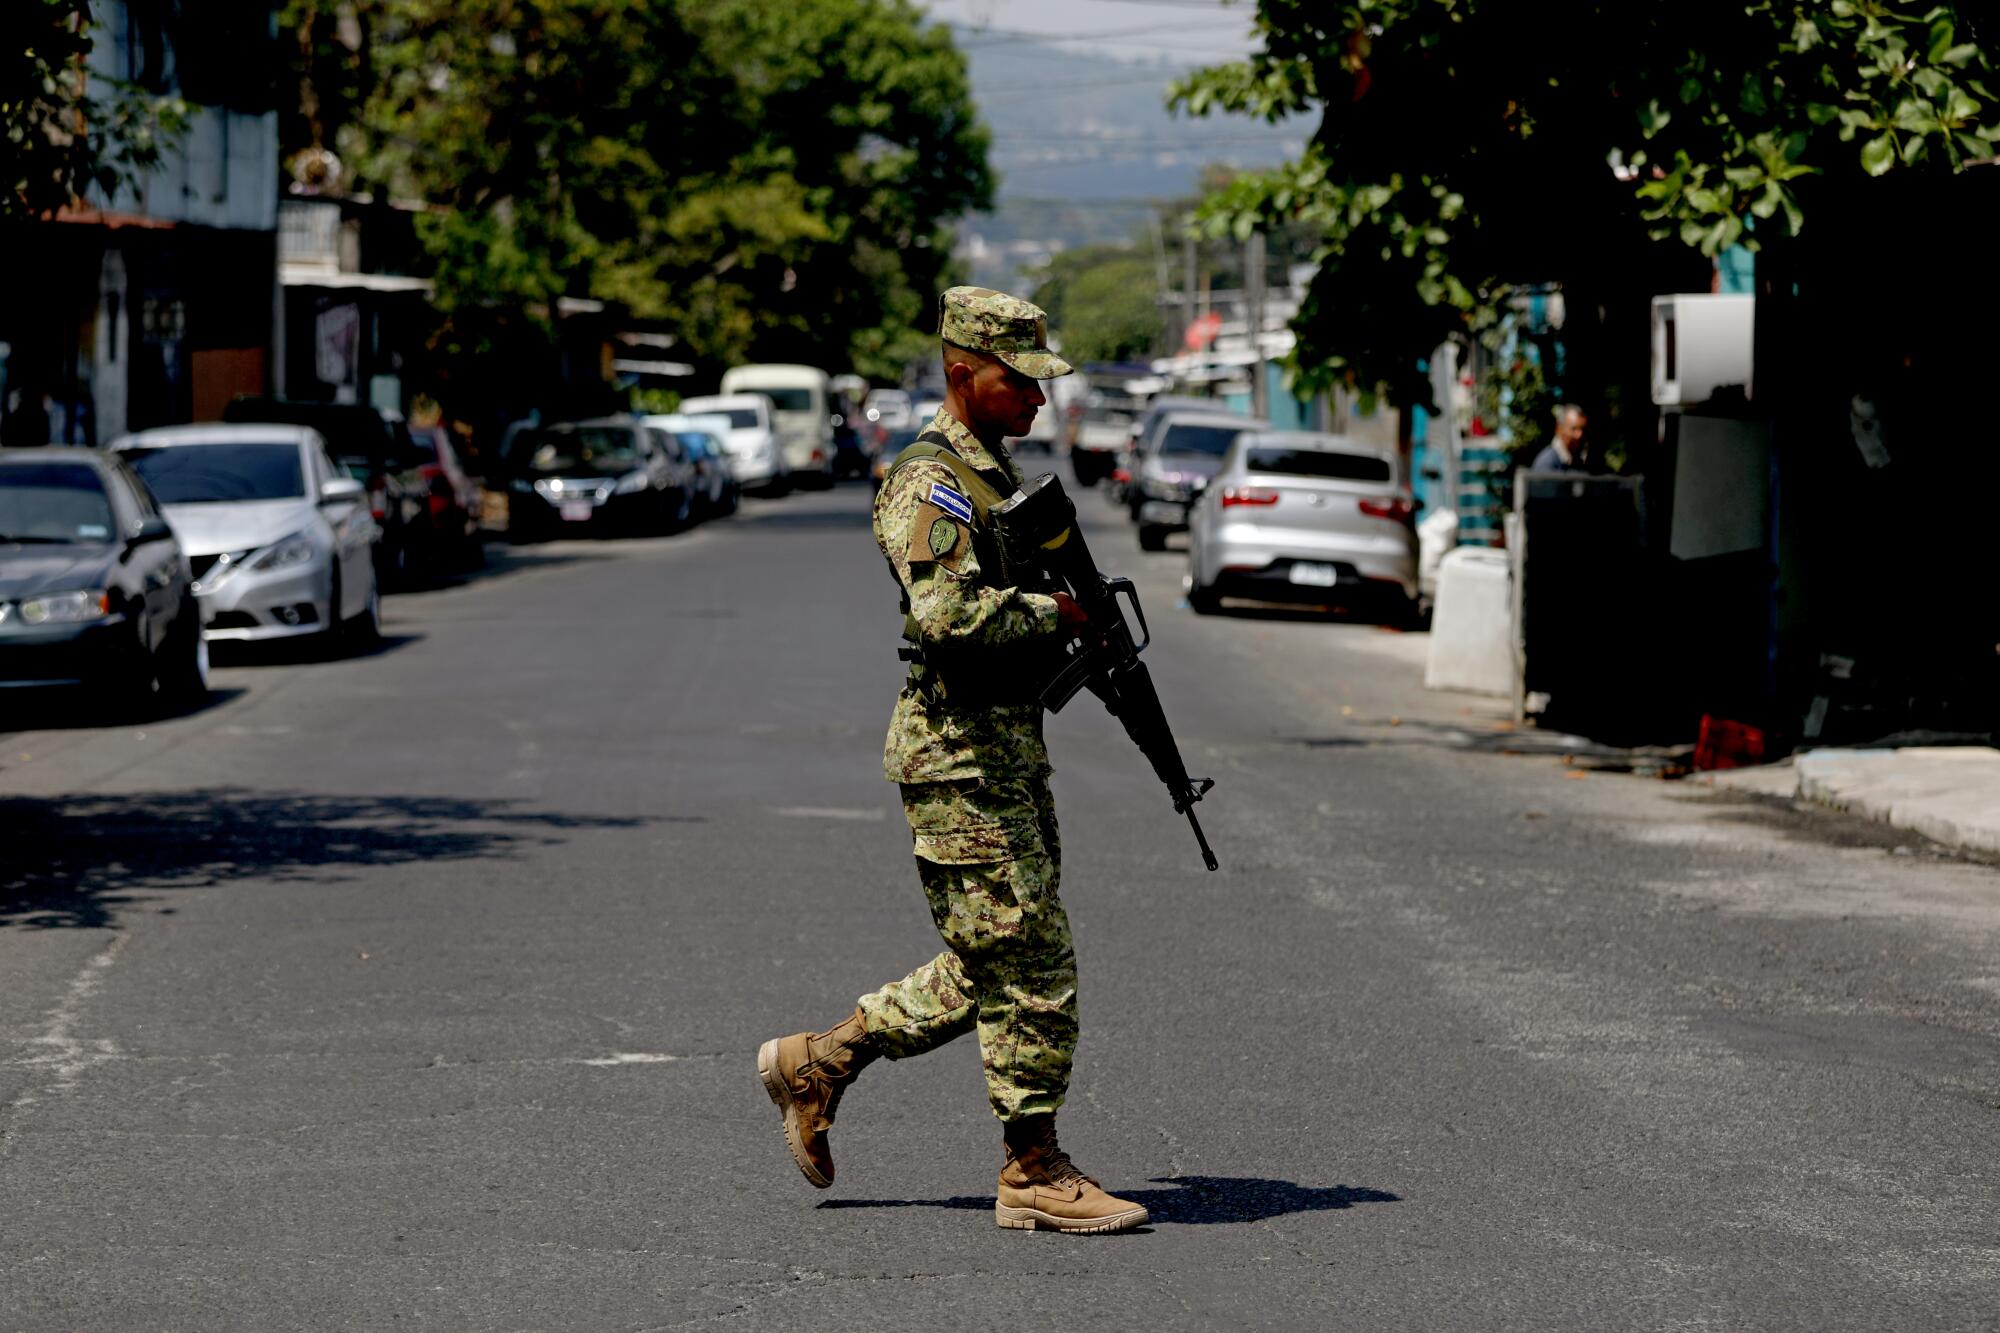  A person in fatigues, holding a gun,  walks across a street lined with cars